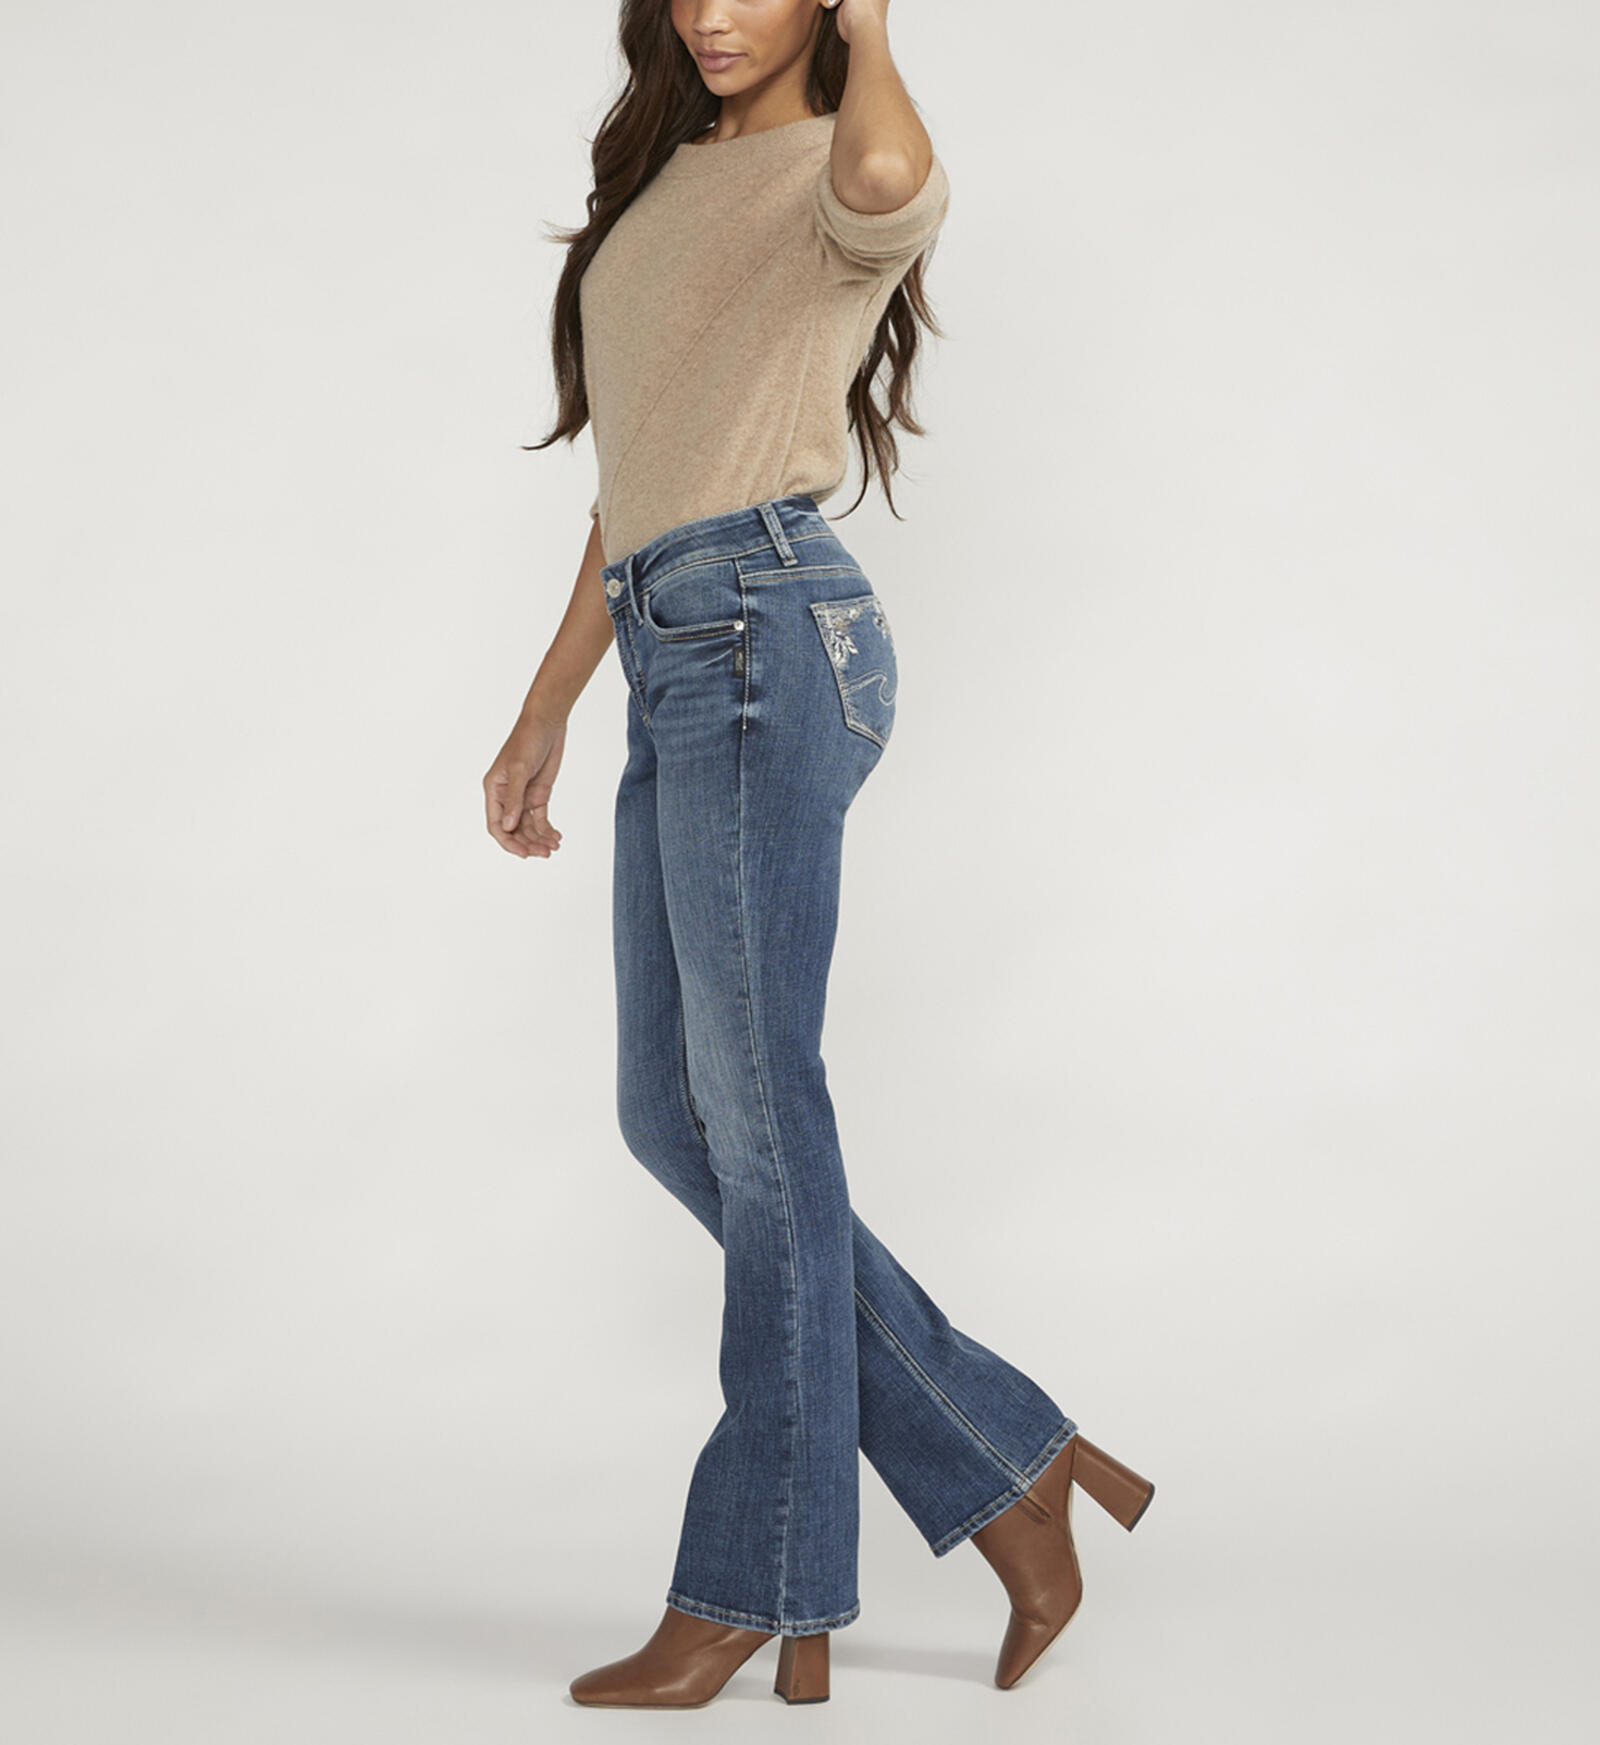 Buy Elyse Mid Rise Slim Bootcut Jeans for USD 54.00